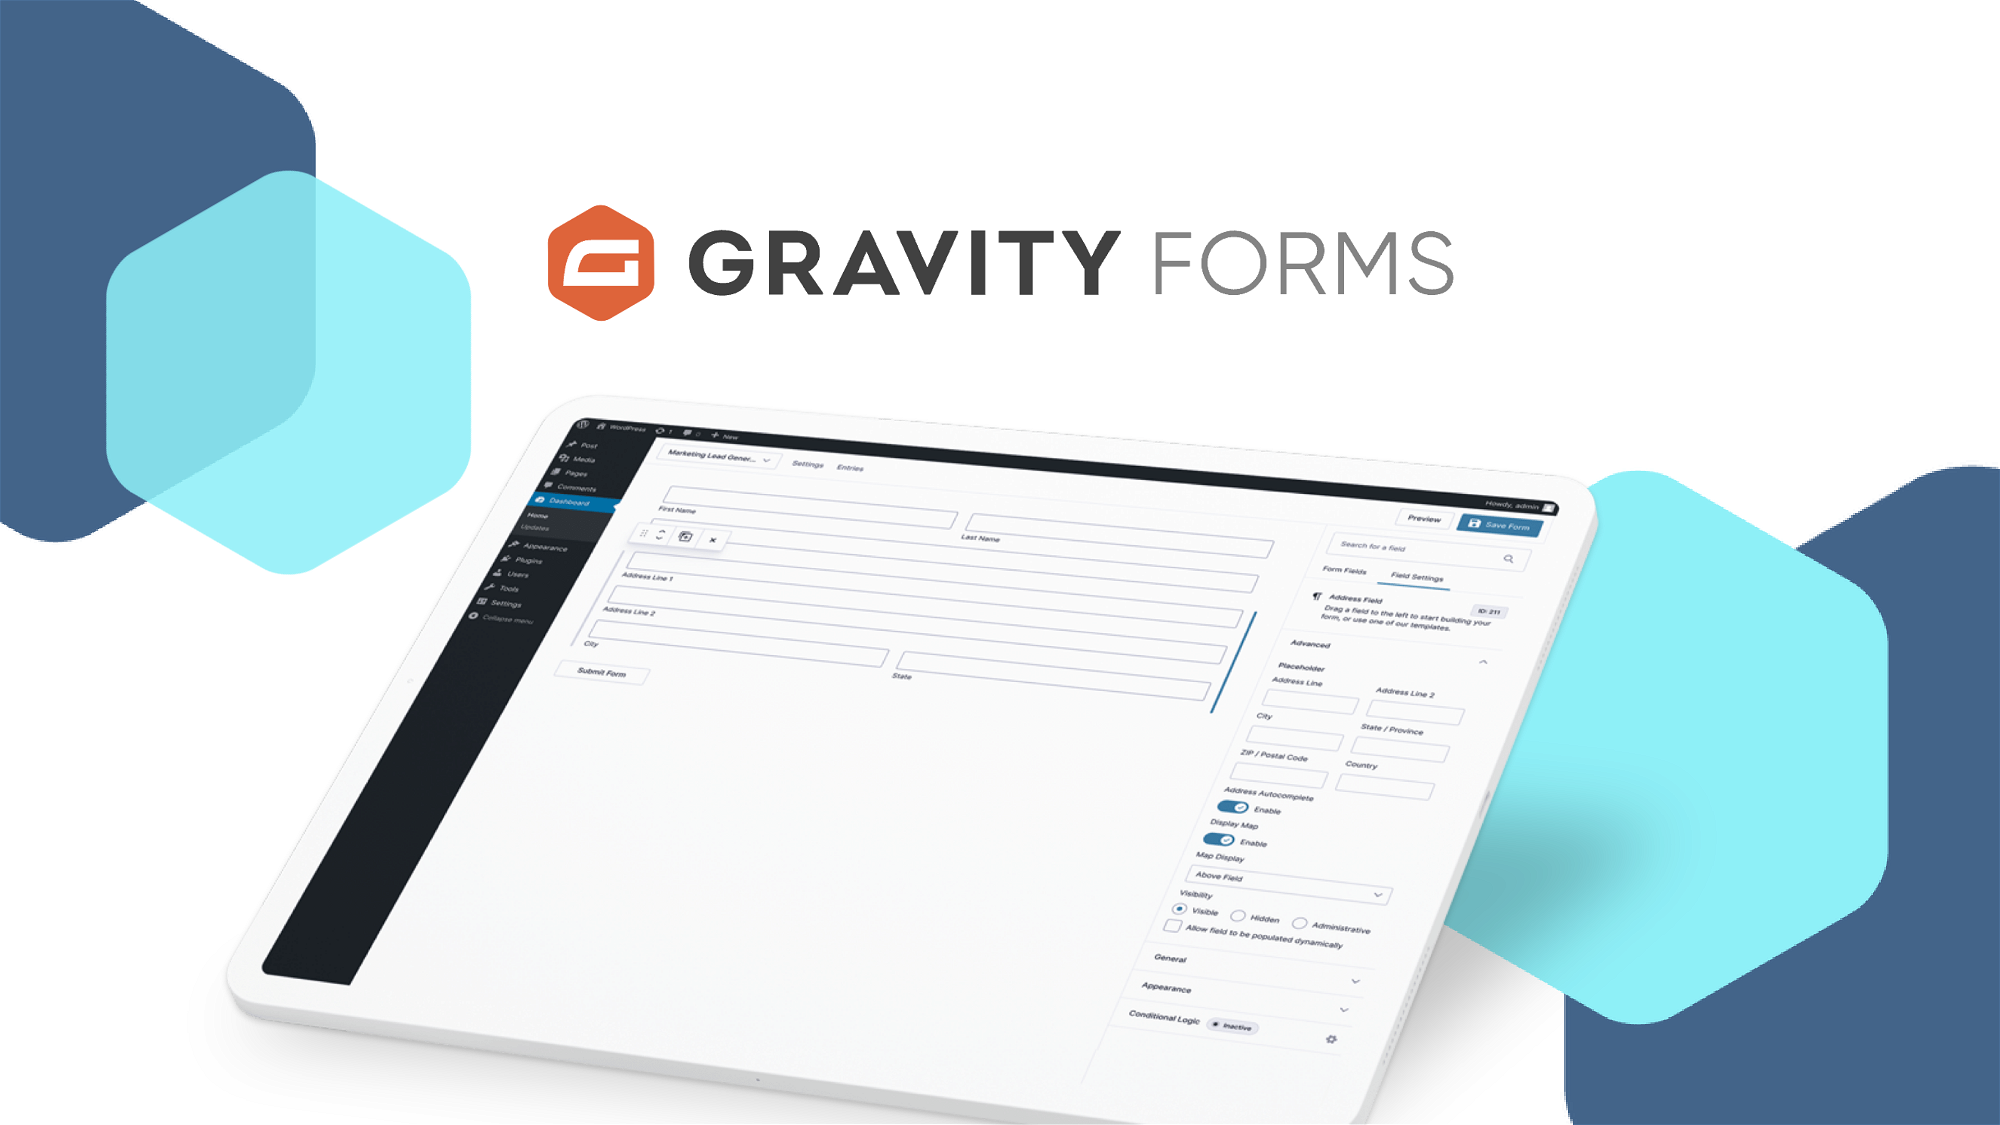 Why Gravity Forms is the Best Typeform Alternative - GravityKit